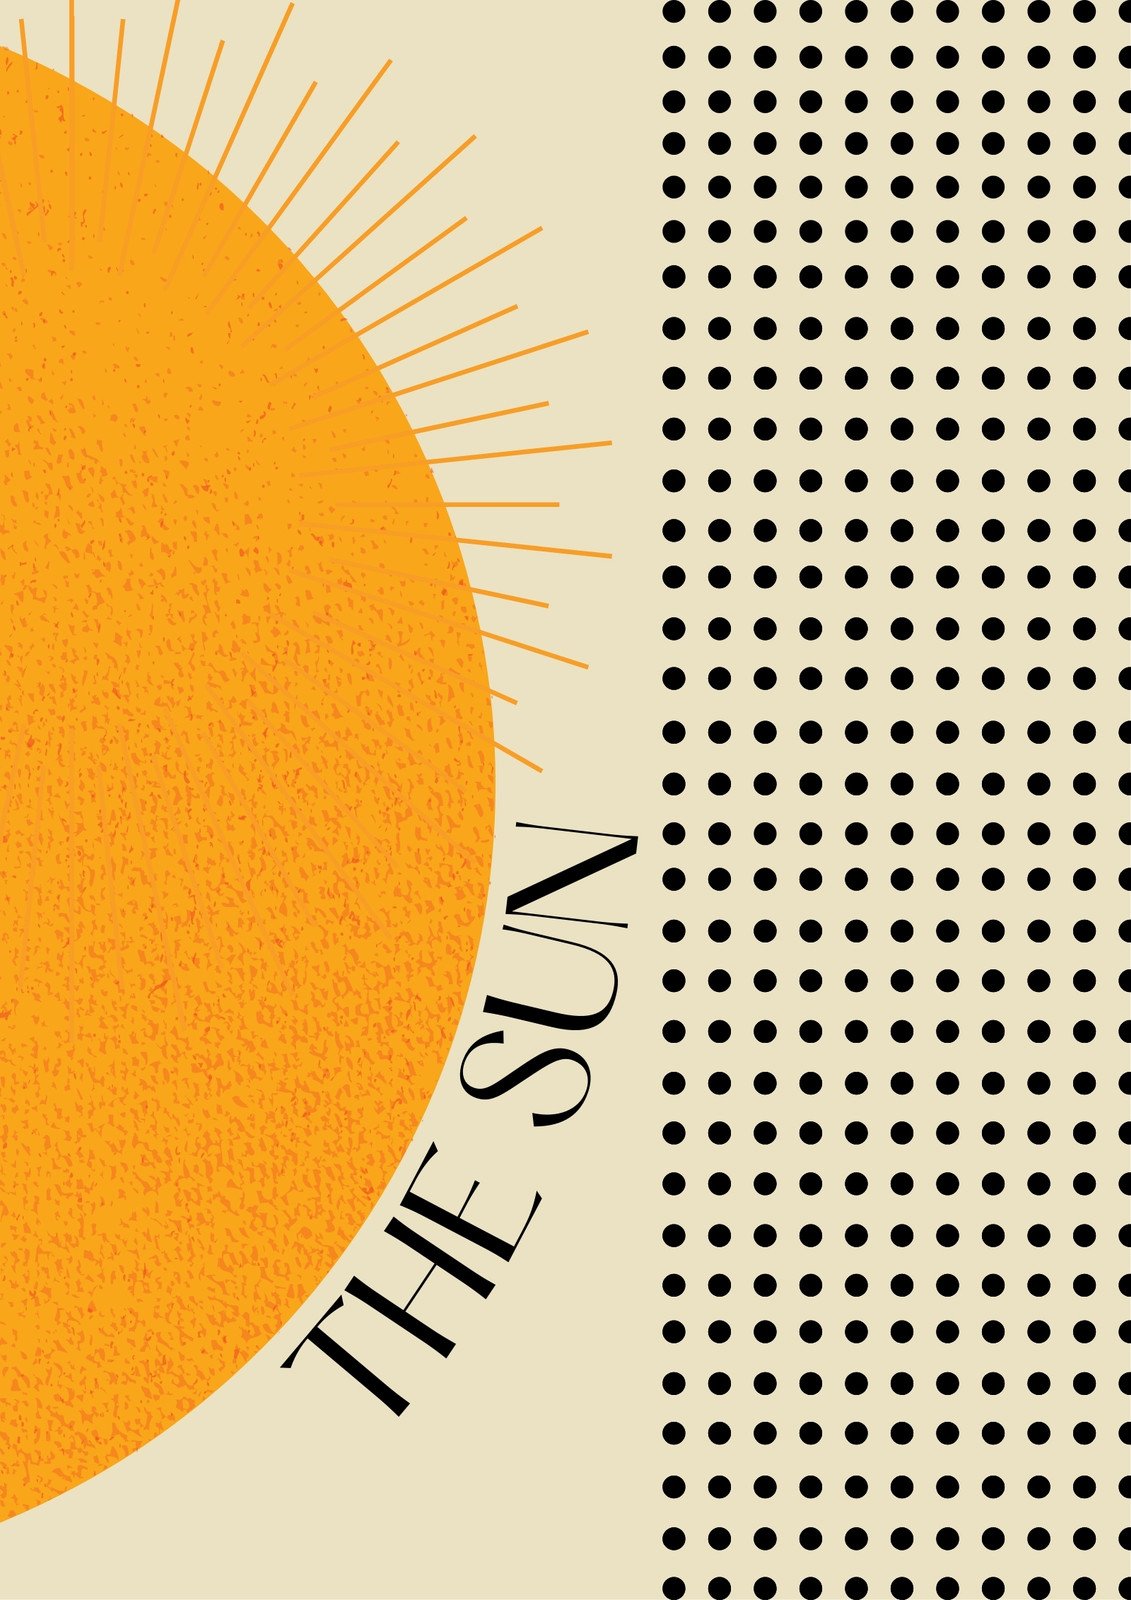 THE SUN Poster